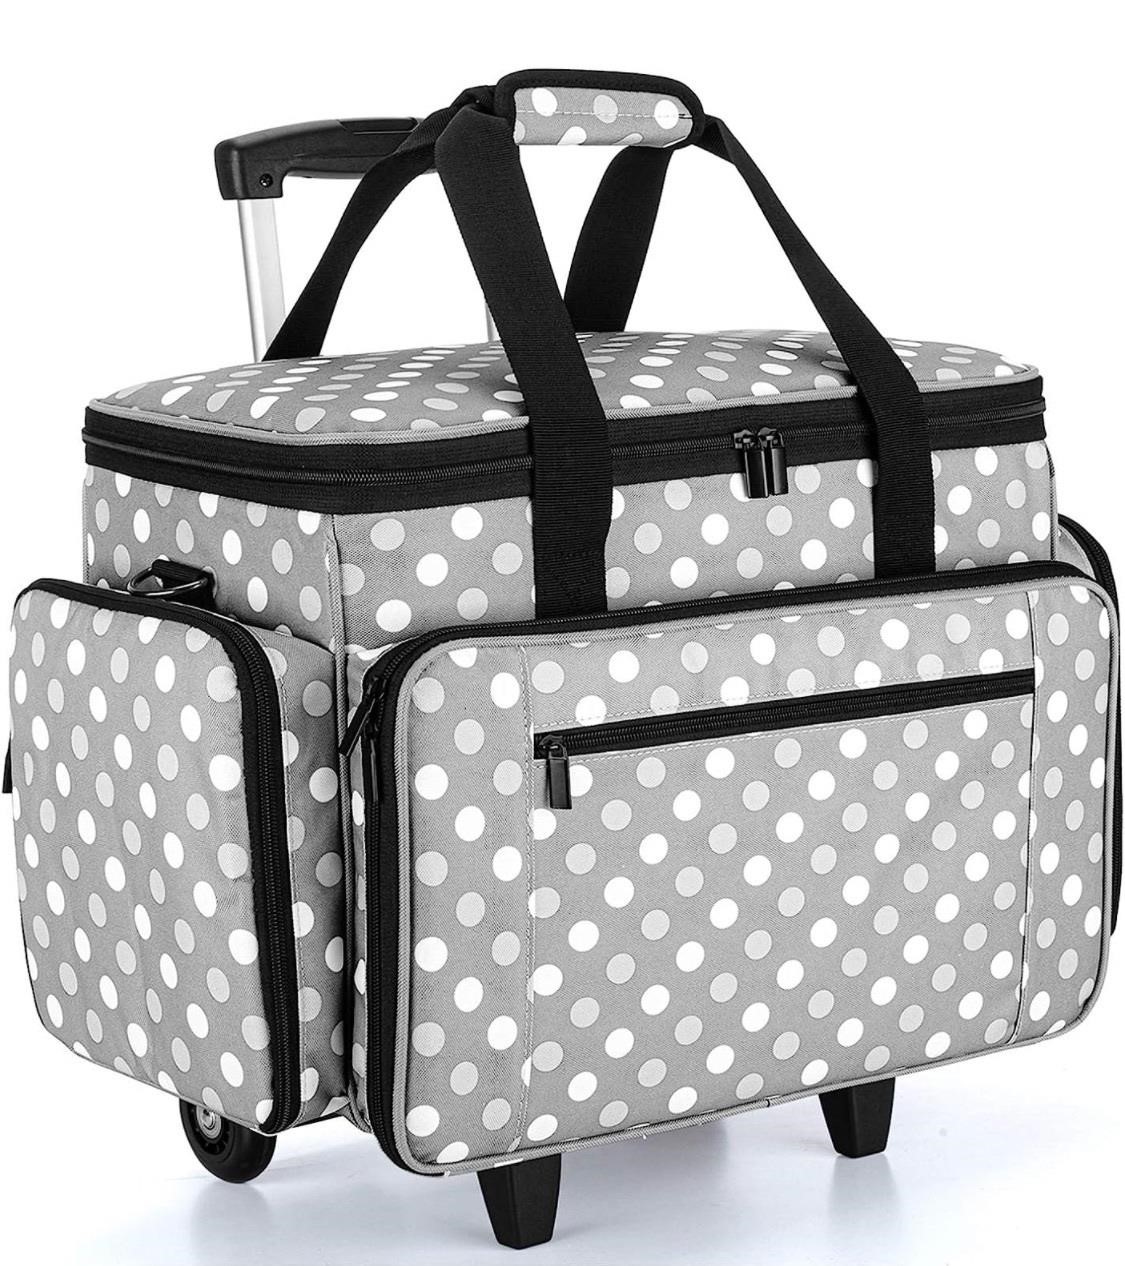 $70 Sewing Machine Case with Detachable Dolly